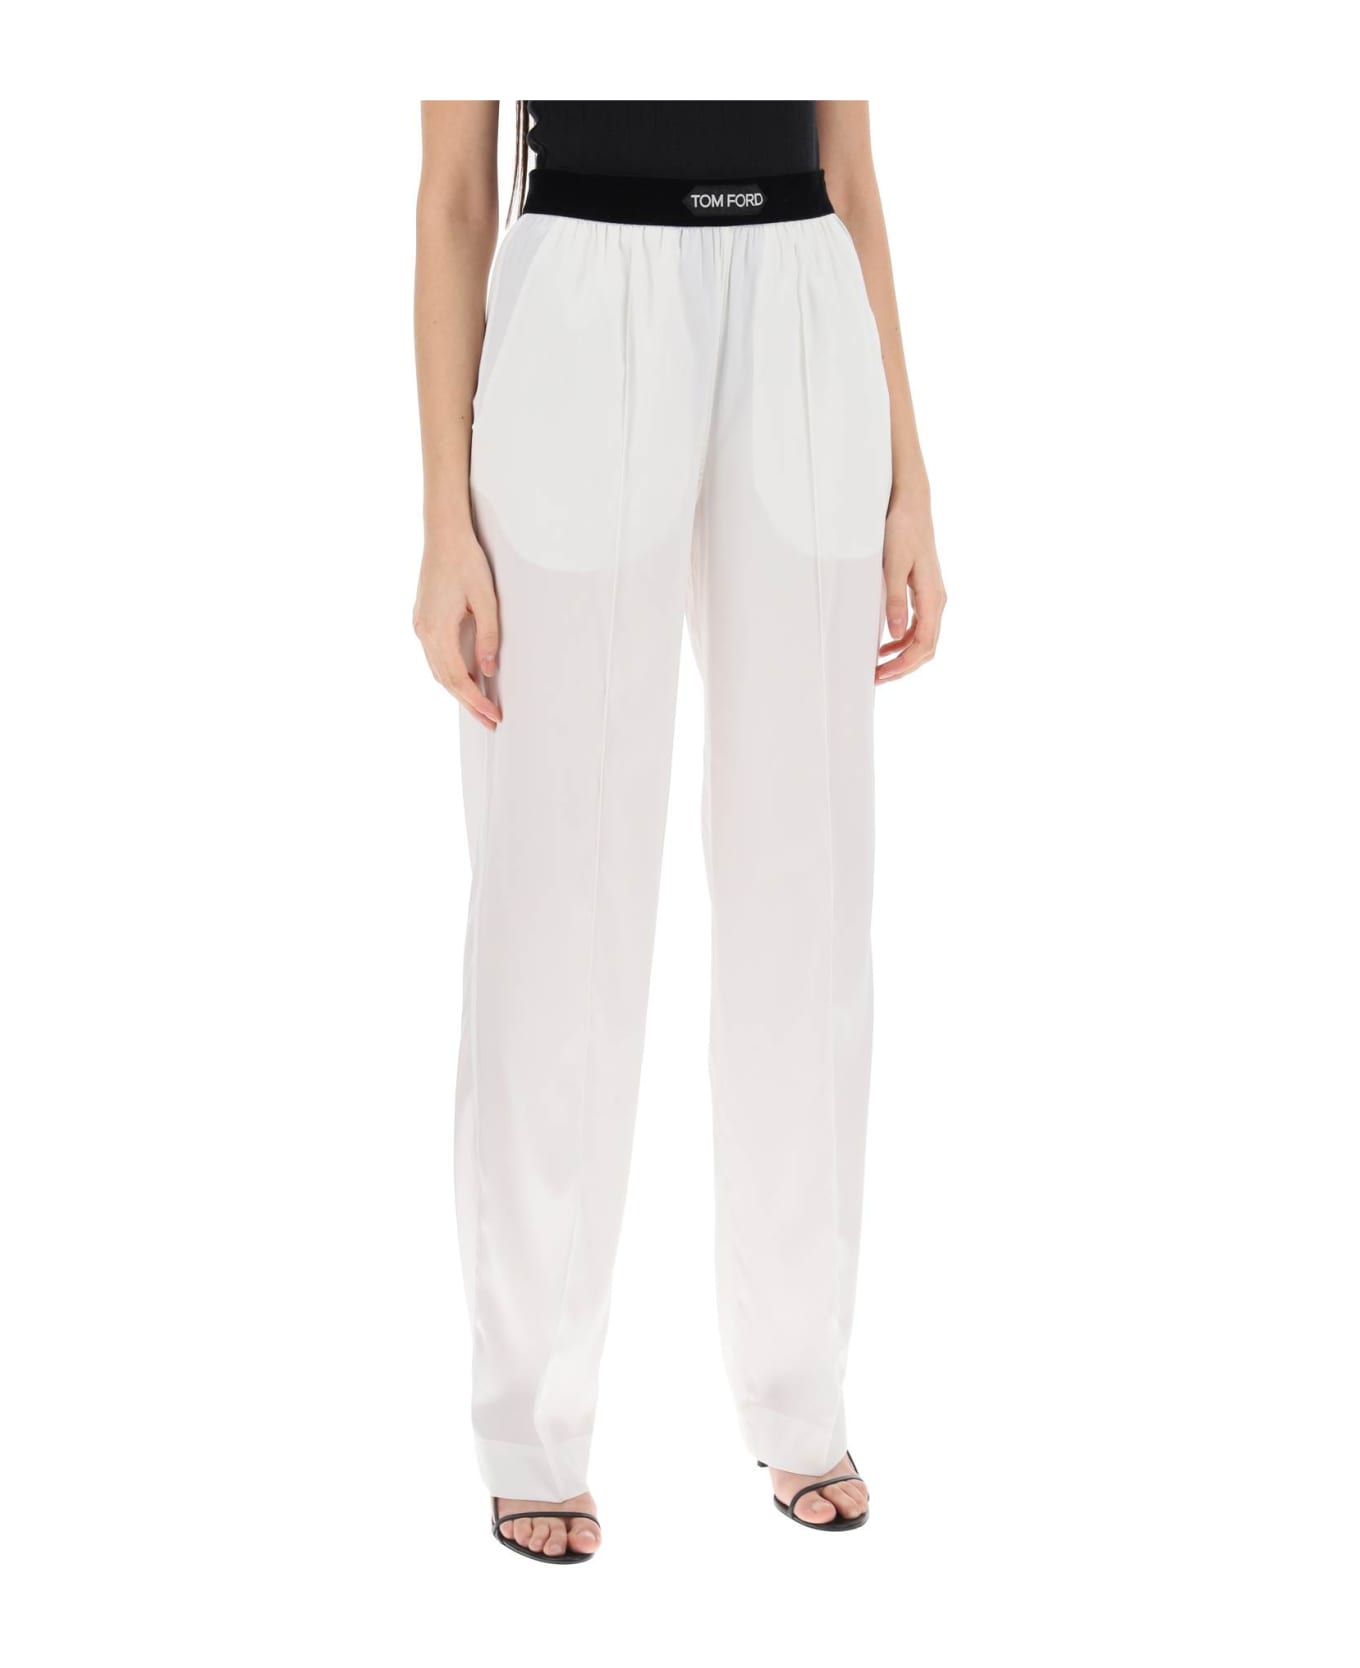 Tom Ford Silk Trousers - White ボトムス